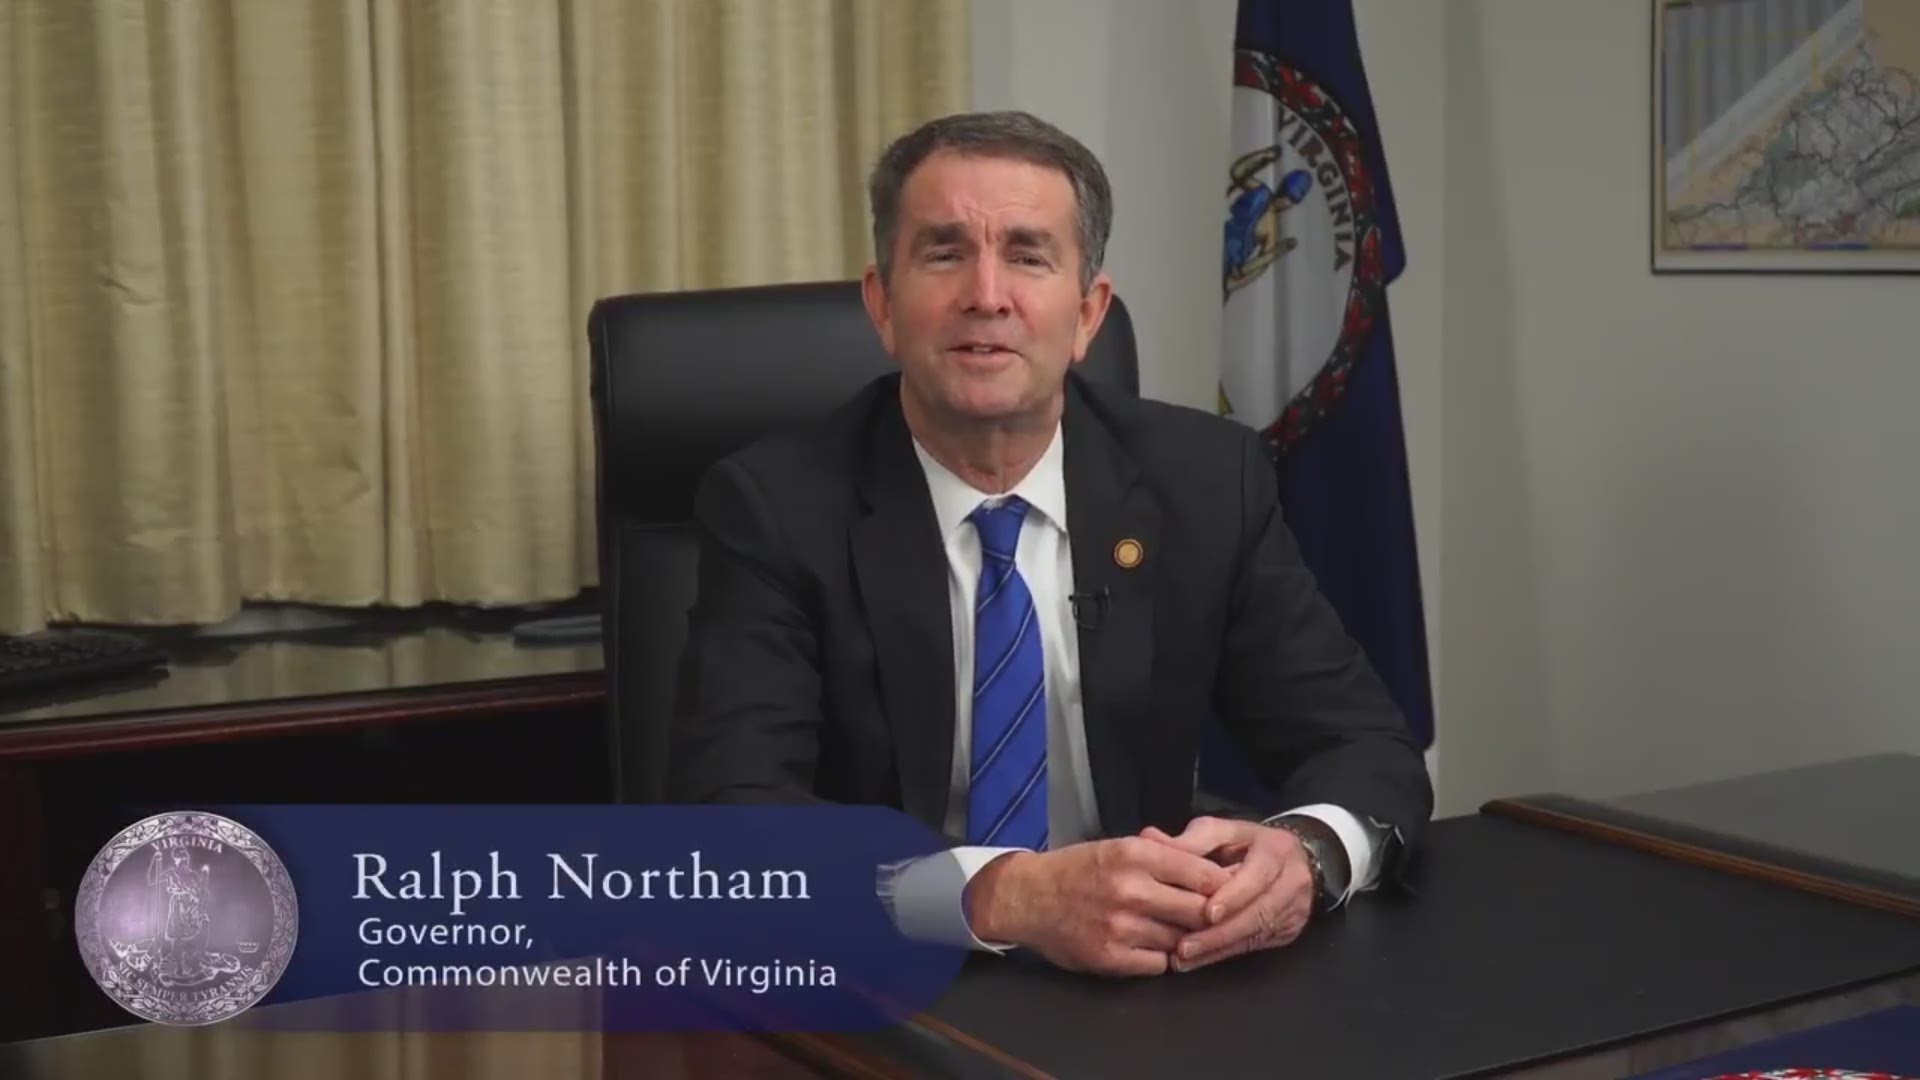 Virginia Governor Ralph Northam issues an apology after 1984 yearbook post shows a man in black face next to another in a KKK hood and robe.